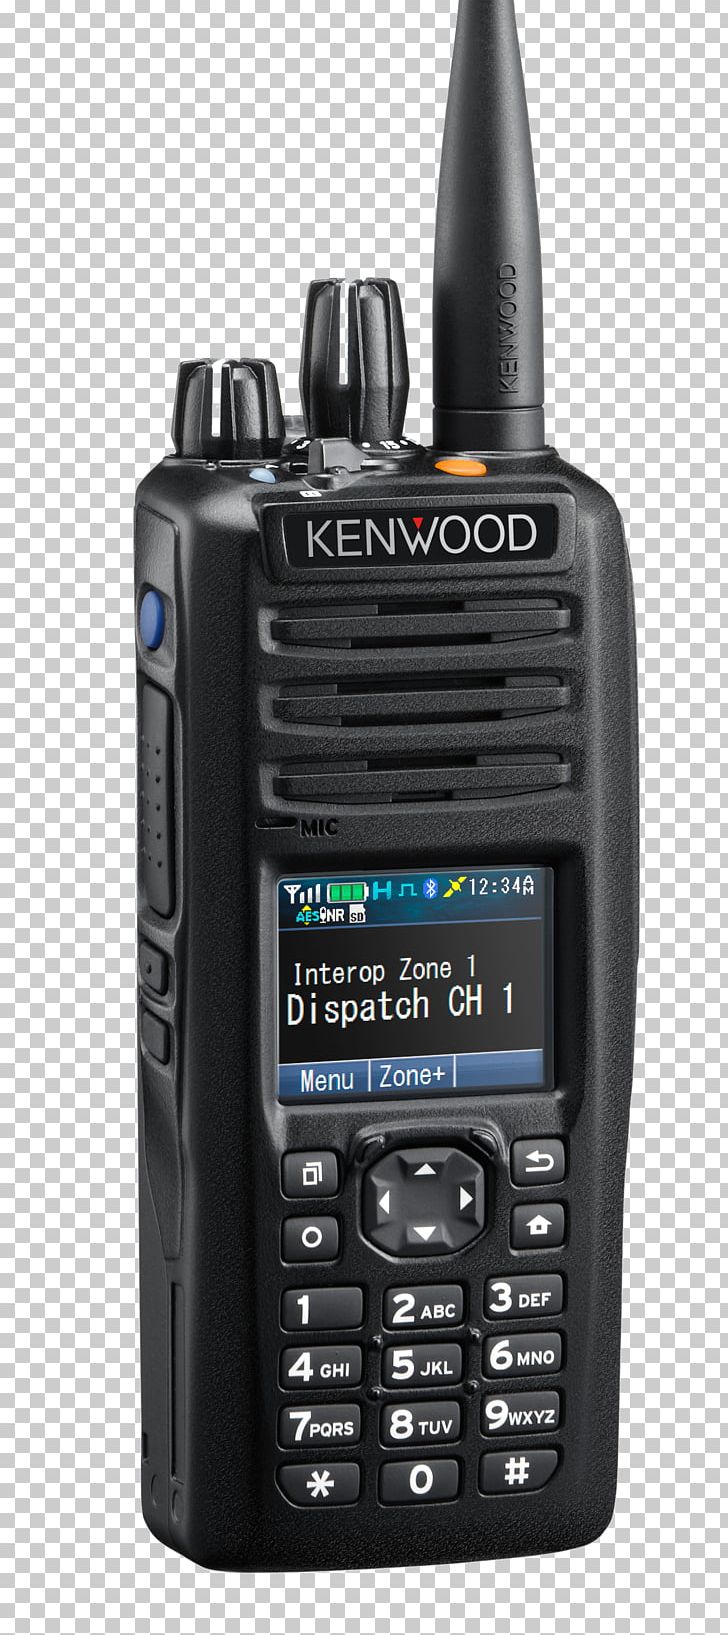 Project 25 NXDN Kenwood Corporation Two-way Radio Trunked Radio System PNG, Clipart, Air Interface, Communication, Digital Home Appliance, Digital Mobile Radio, Electronic Device Free PNG Download